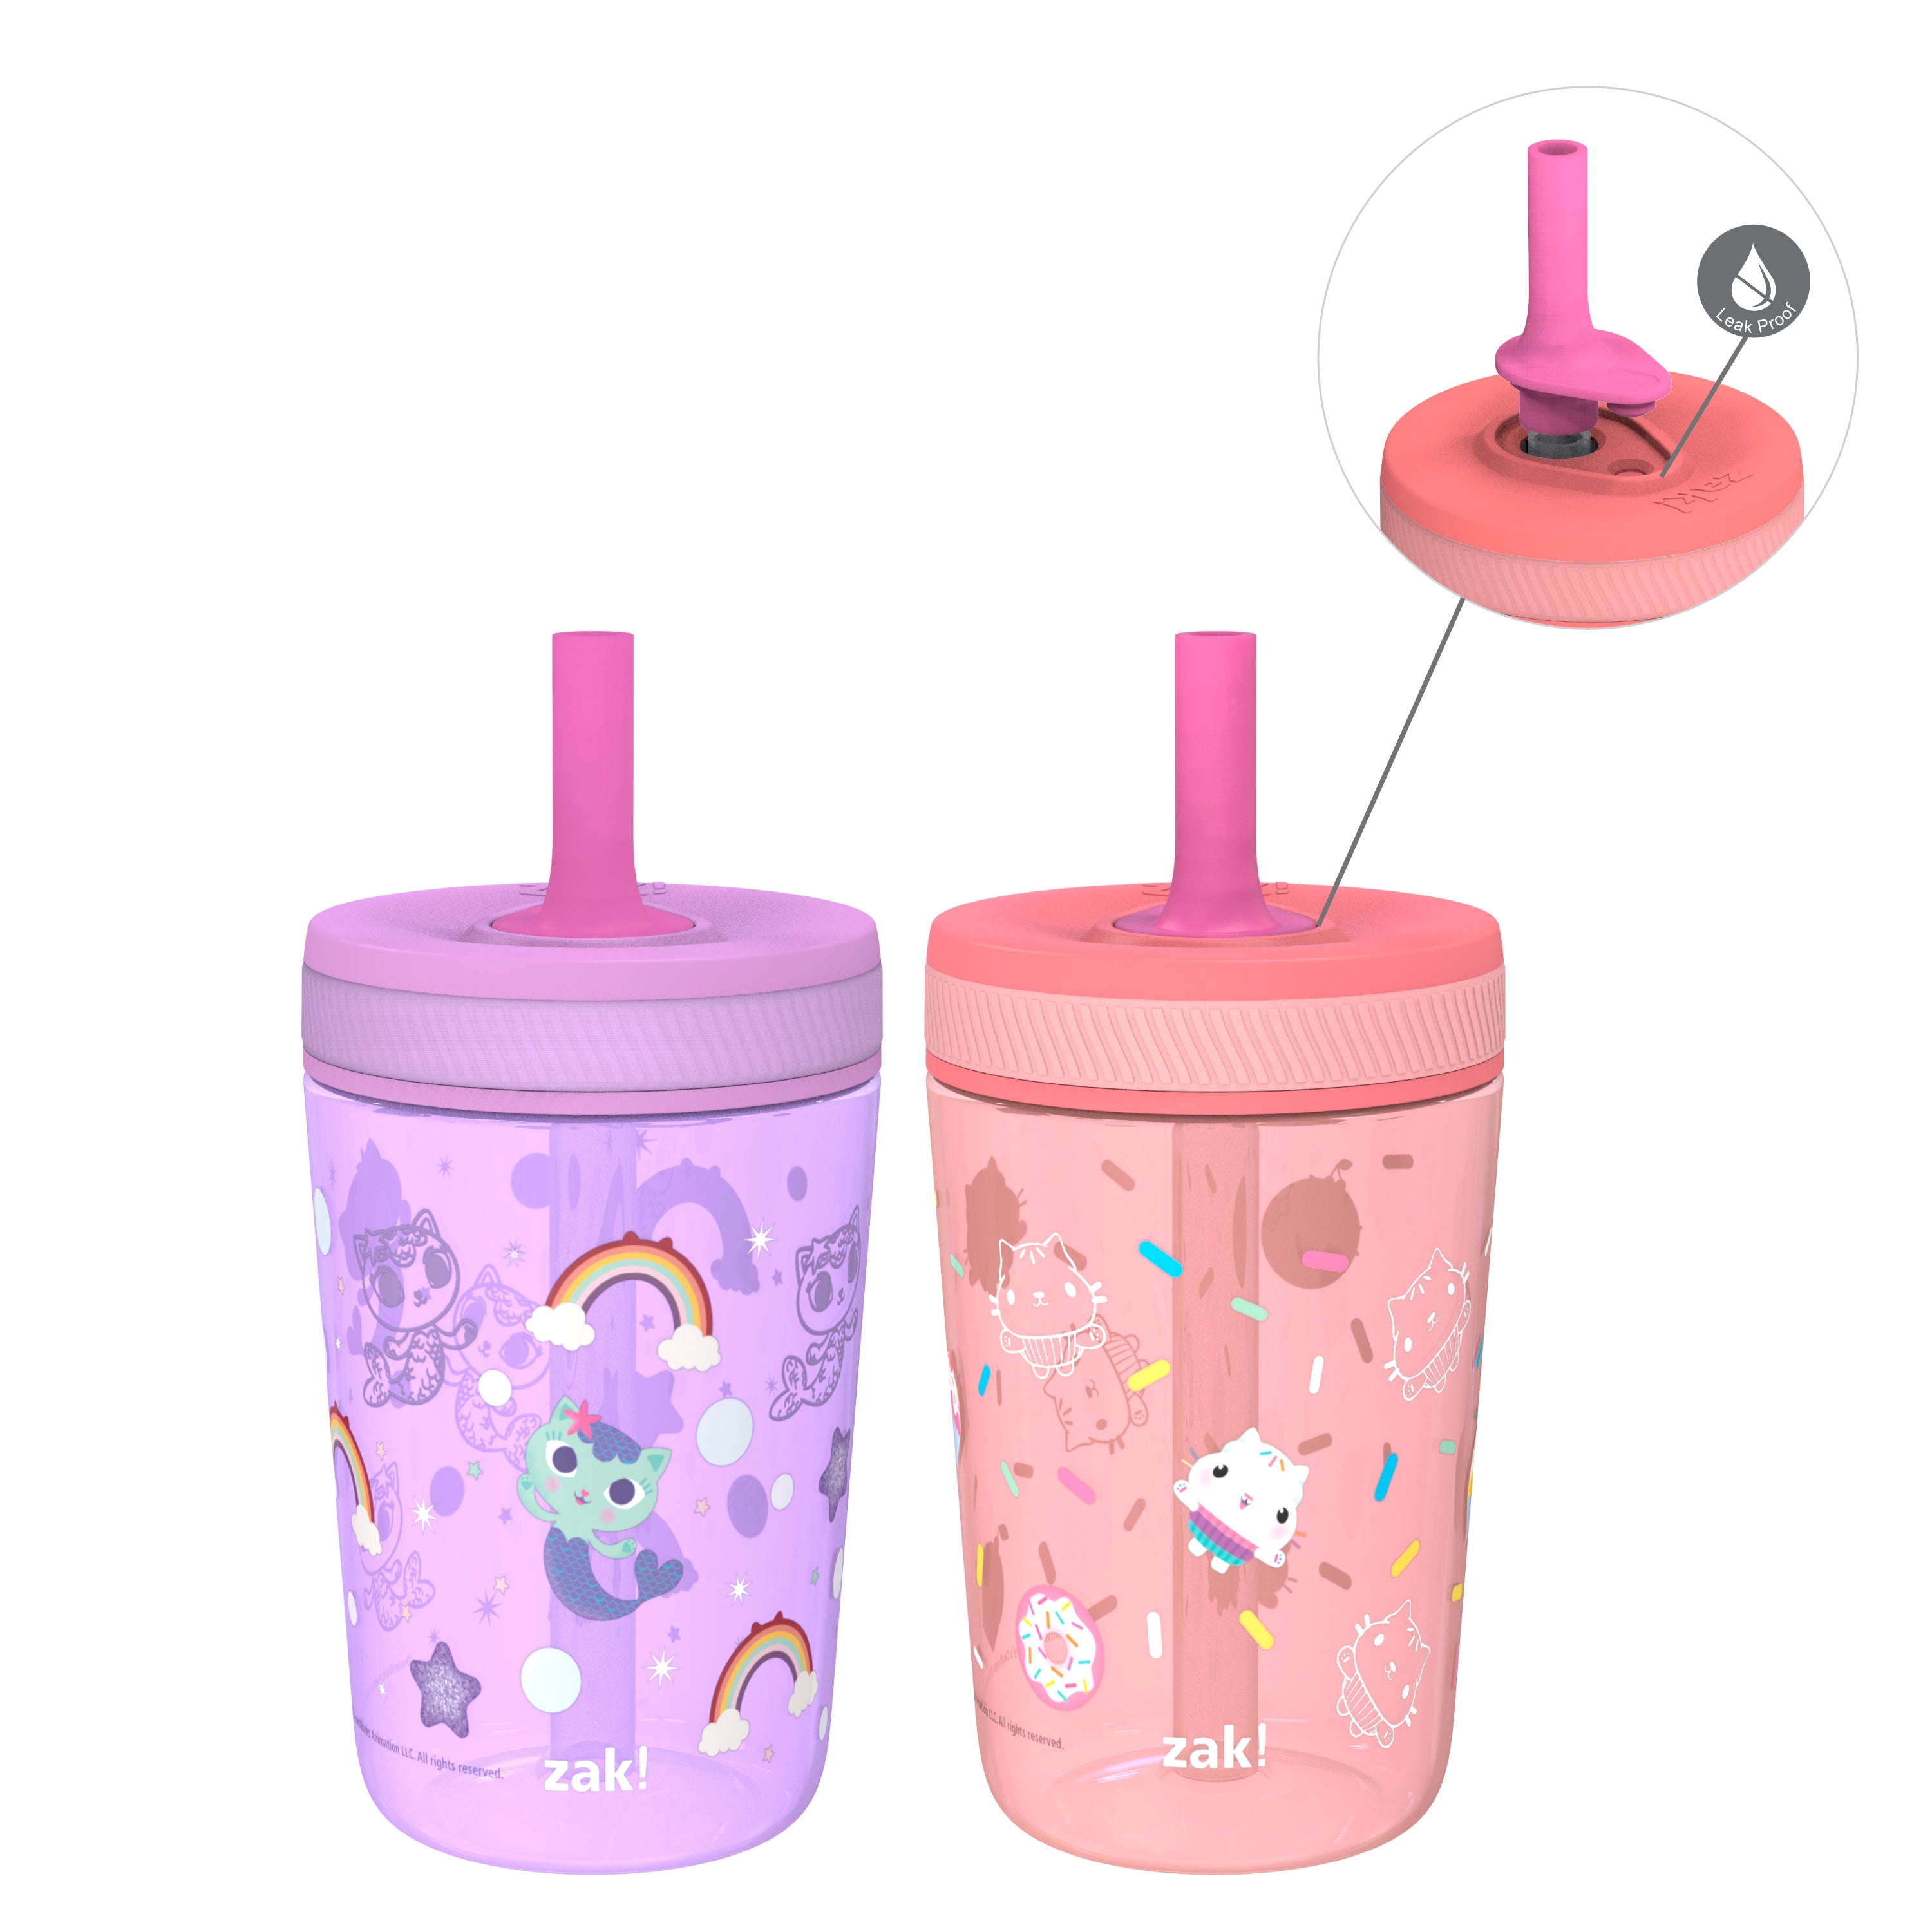 Cribmates 10oz Spill Proof Cups 2-Pack, Pink Flowers